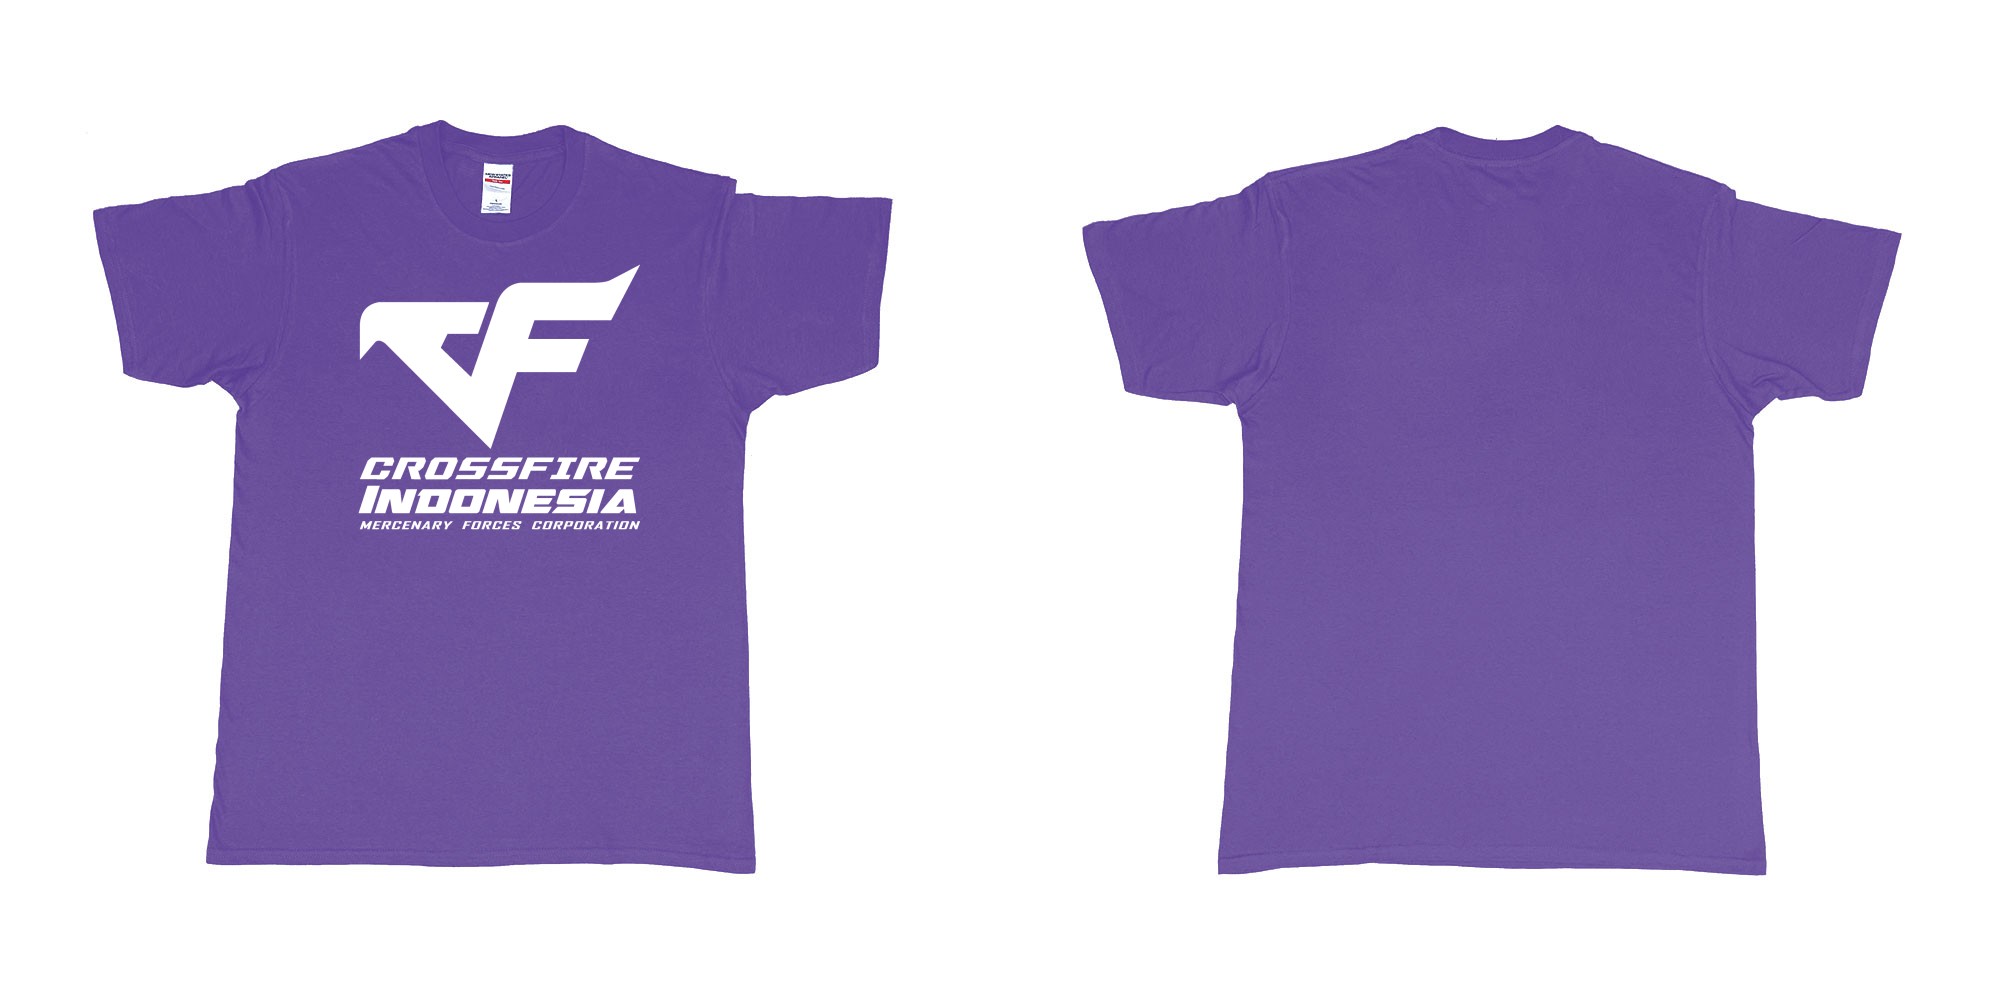 Custom tshirt design crossfire indonesia cfindo in fabric color purple choice your own text made in Bali by The Pirate Way